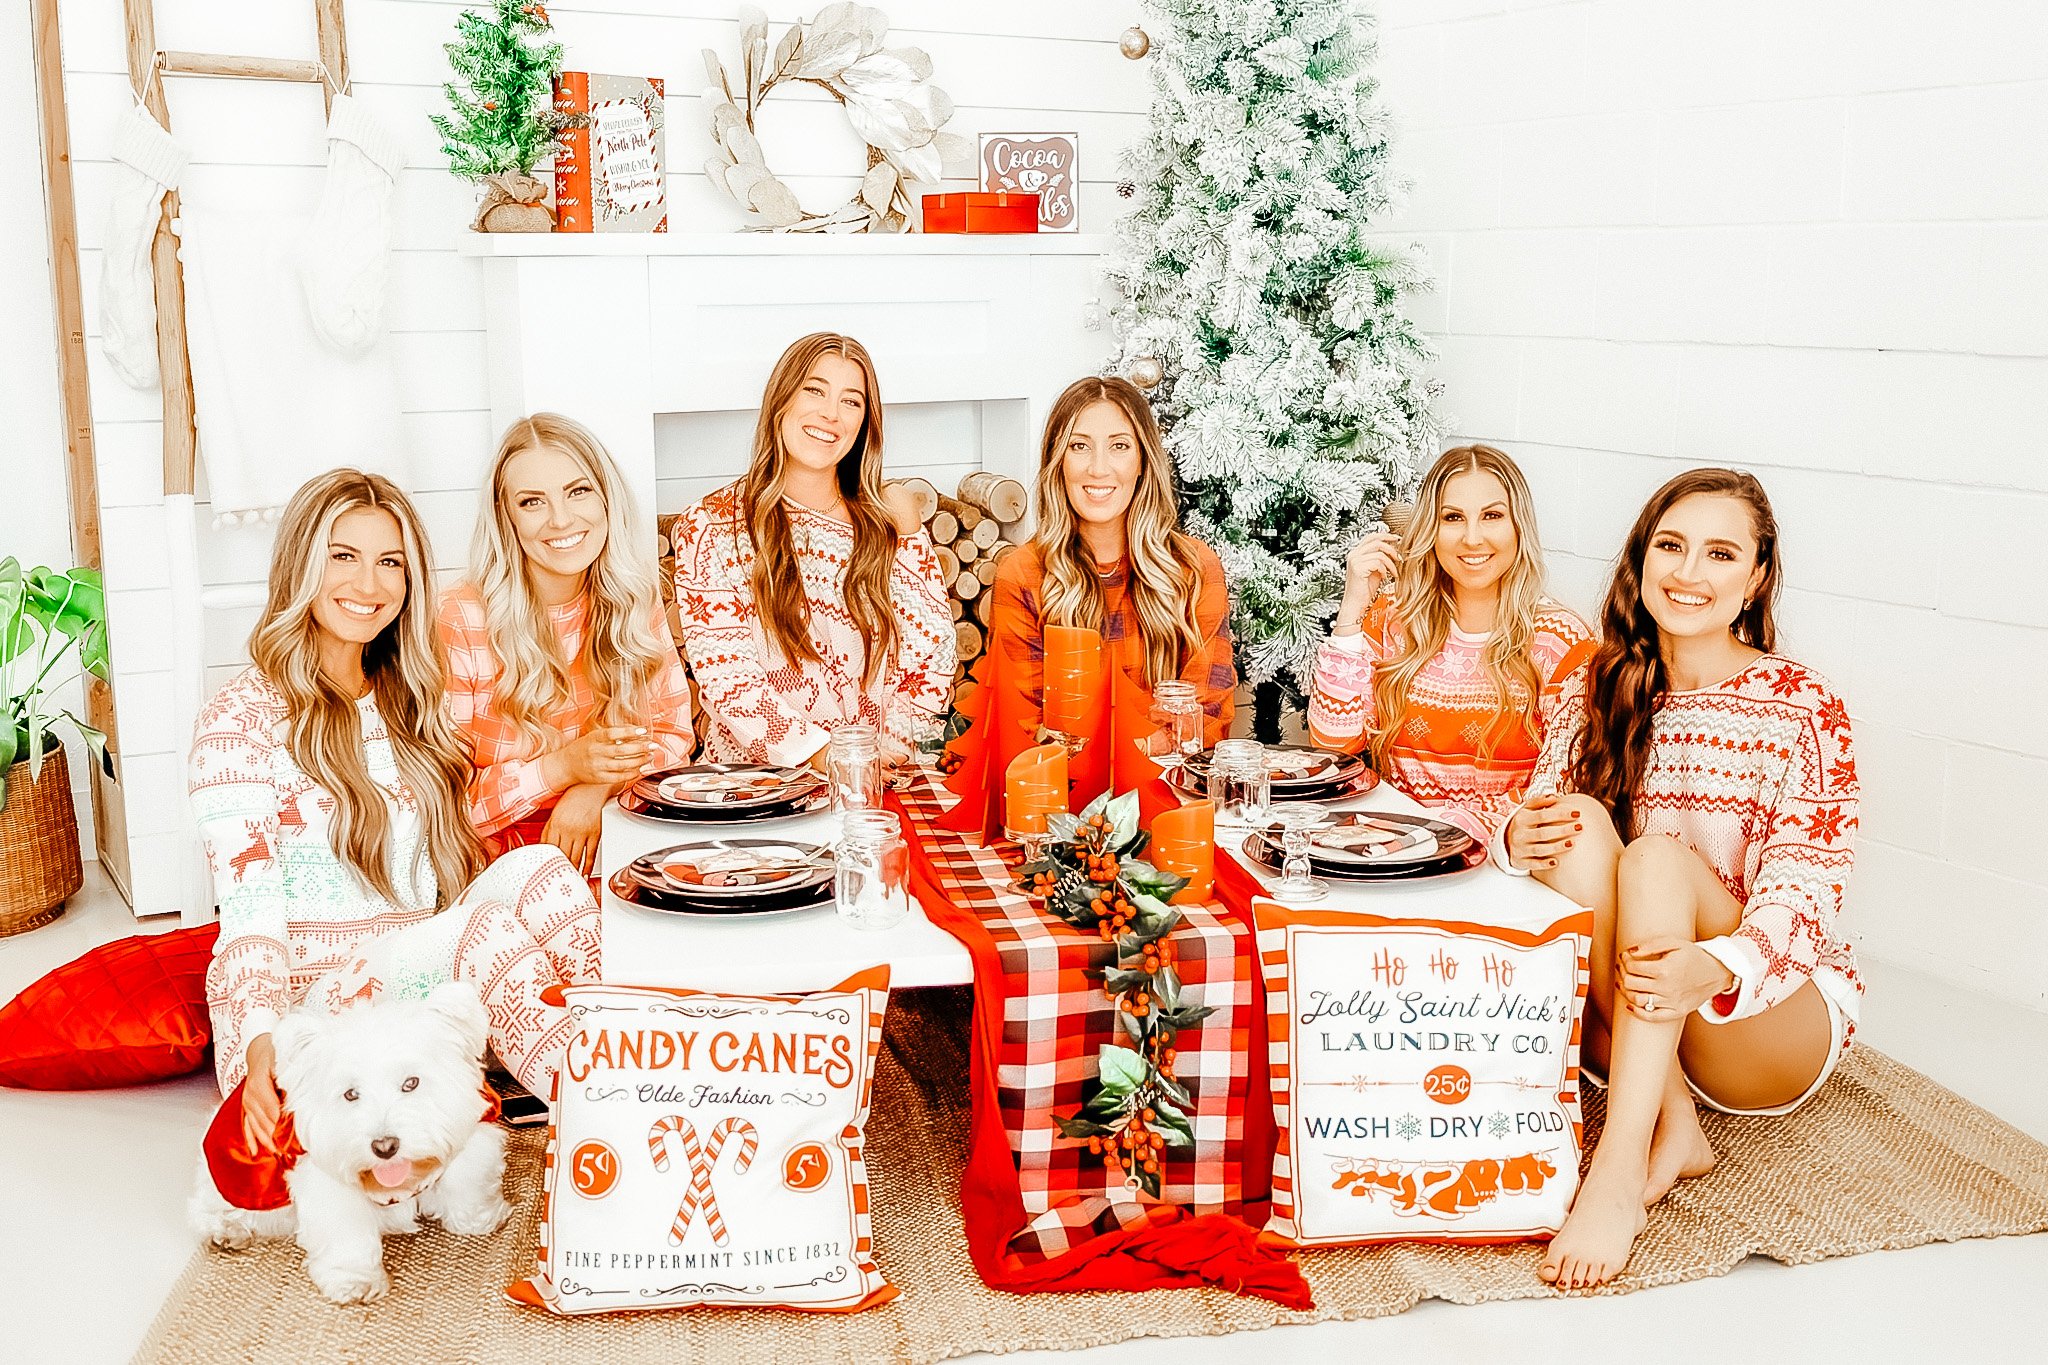 Guide on how to host a girlfriends holiday pajama party